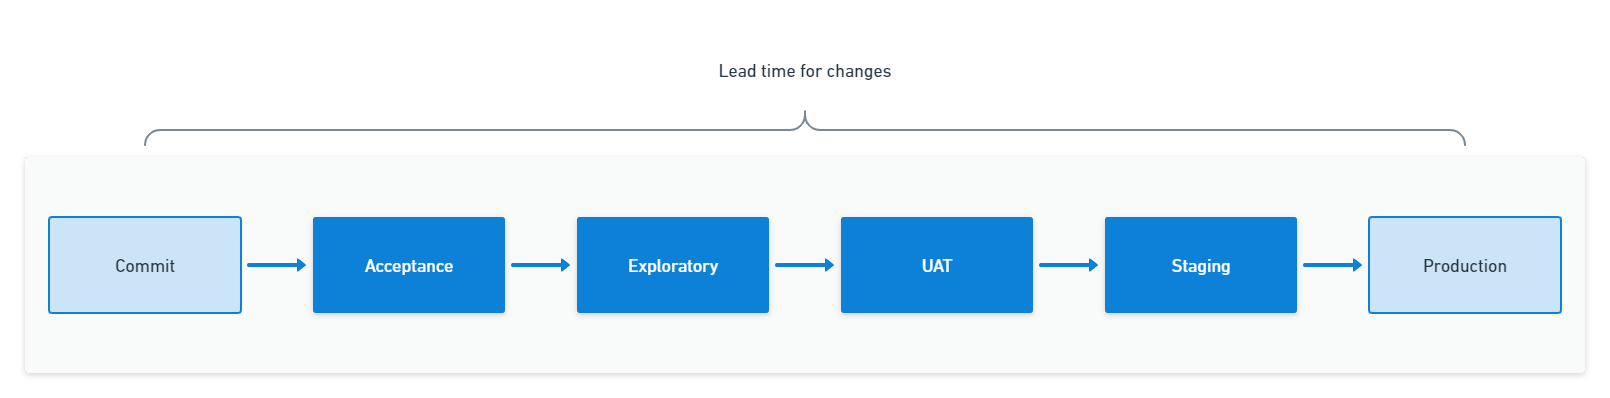 Lead time for changes spans the deployment pipeline